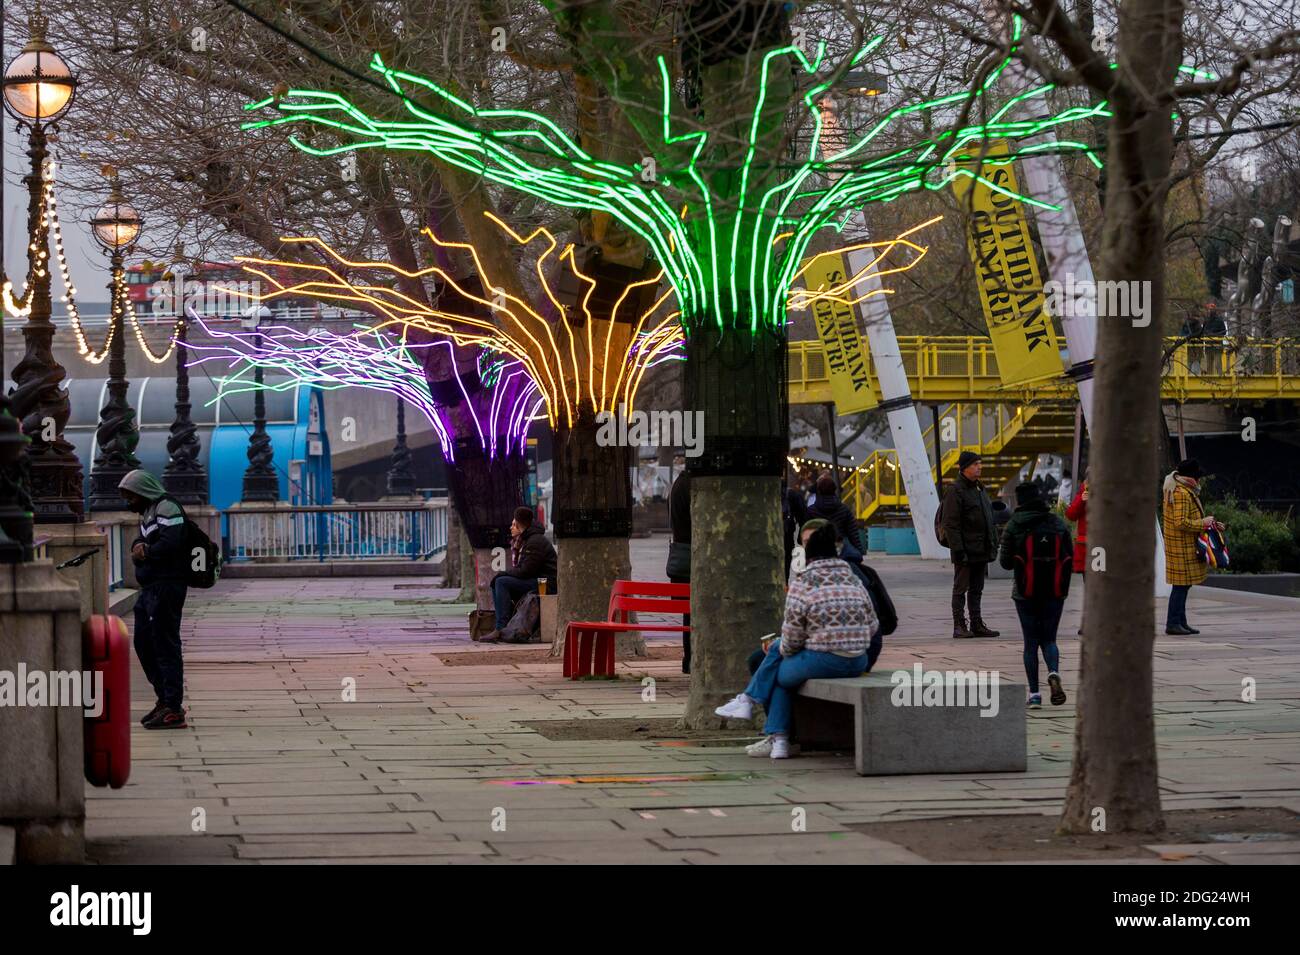 London, UK.  7 December 2020. Members of the public pass by "Lumen" by David Ogle, trees illuminated with glowing neon flex. Preview of “Winter Light” presented by Southbank Centre.  Over 15 artworks and new illuminated commissions by a range of leading international artists are on display around the site’s buildings and the Riverside Walk until the end of February 2021. Credit: Stephen Chung / Alamy Live News Stock Photo